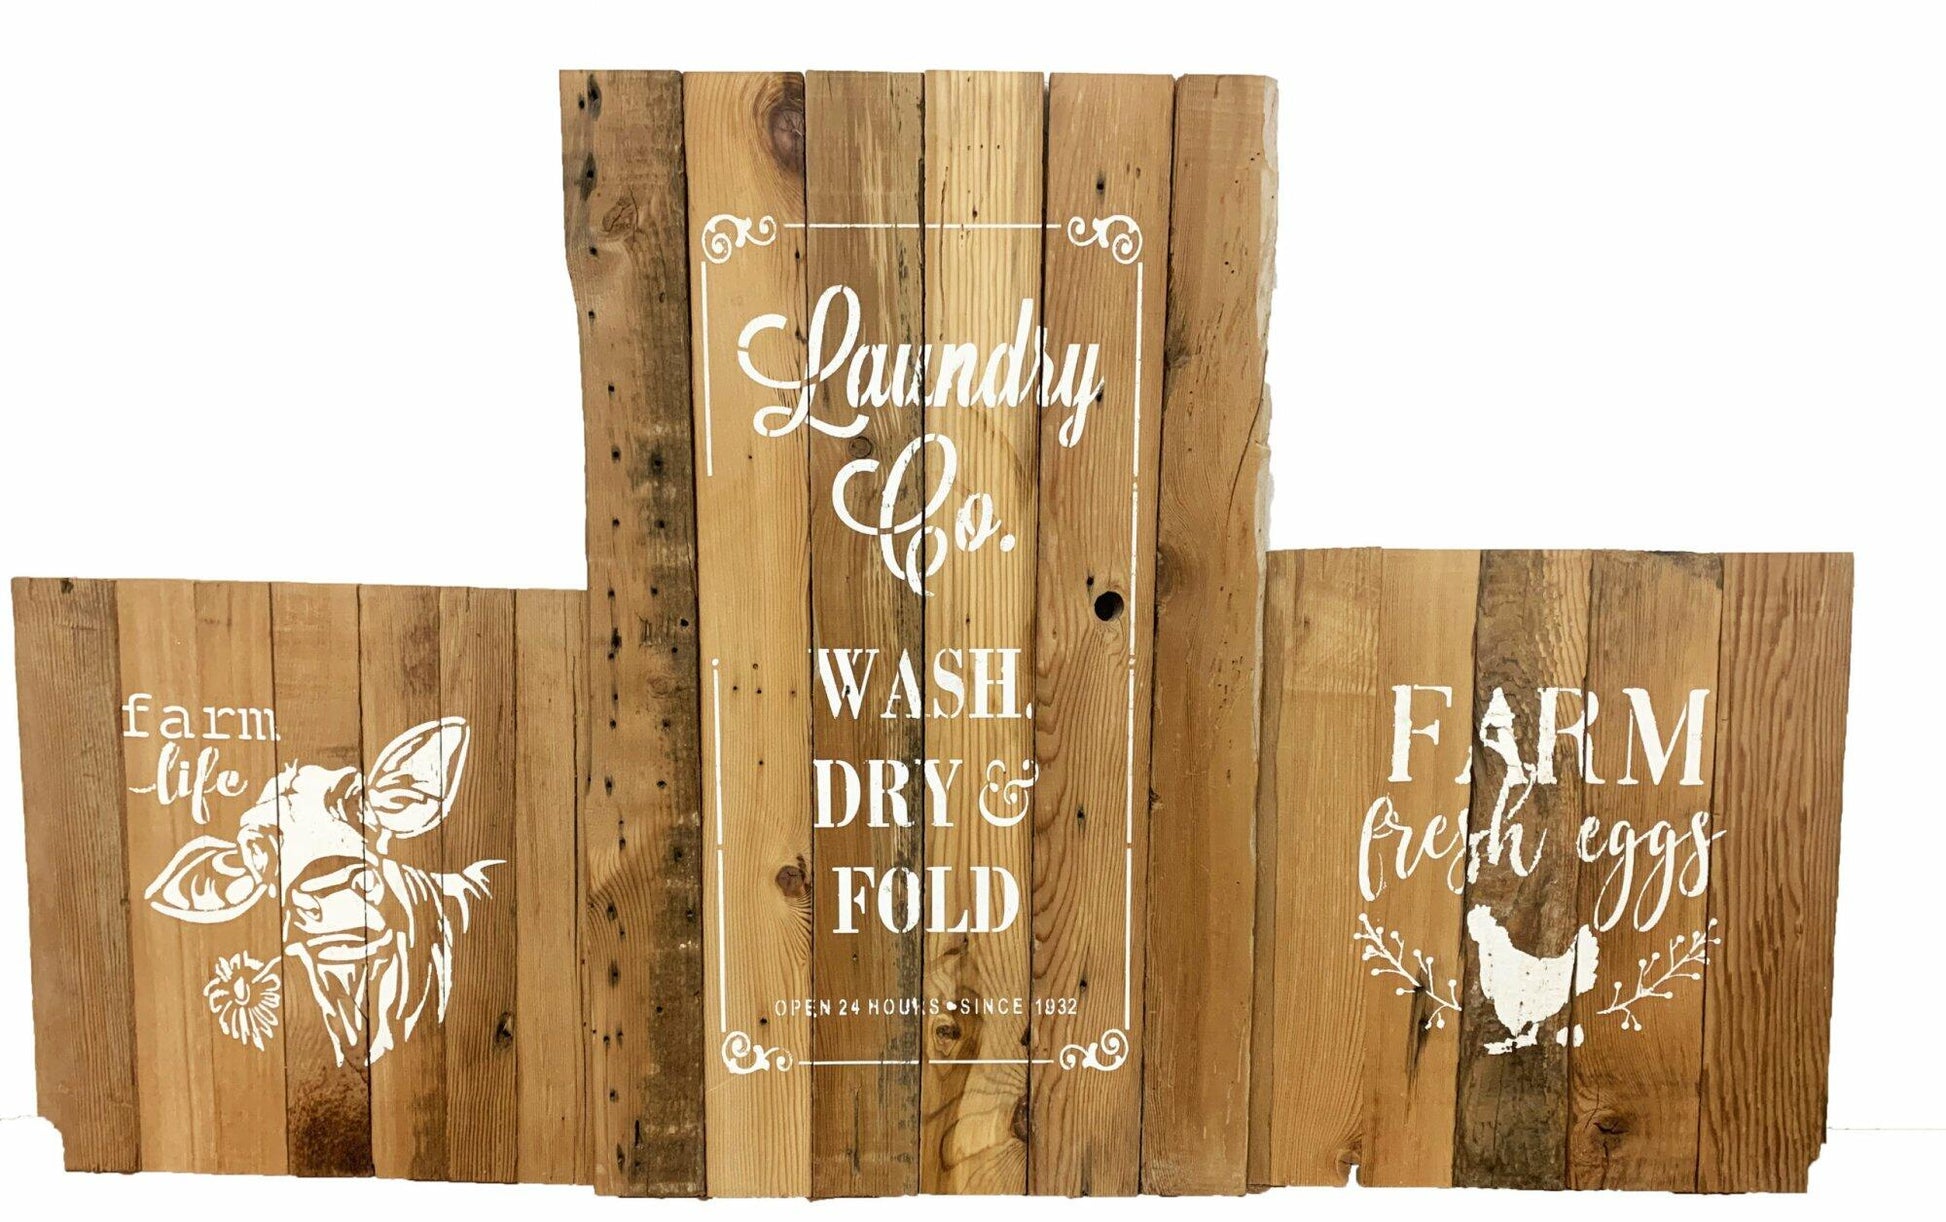 three reclaimed barnwood signs, two smaller to the left and right, one larger in the middle. Each sign has a stamped paint design on them. On sign to the left it reads Farm Life with a cow holding a flower in its mouth underneath. The large middle sign reads Laundry Co. Wash, Dry, & Fold. Open 24 hours since 1932. Smaller sign to the right reads Farm Fresh Eggs with a chicken laying an egg underneath and florals on each side of chicken. Wood has distressed characteristics.